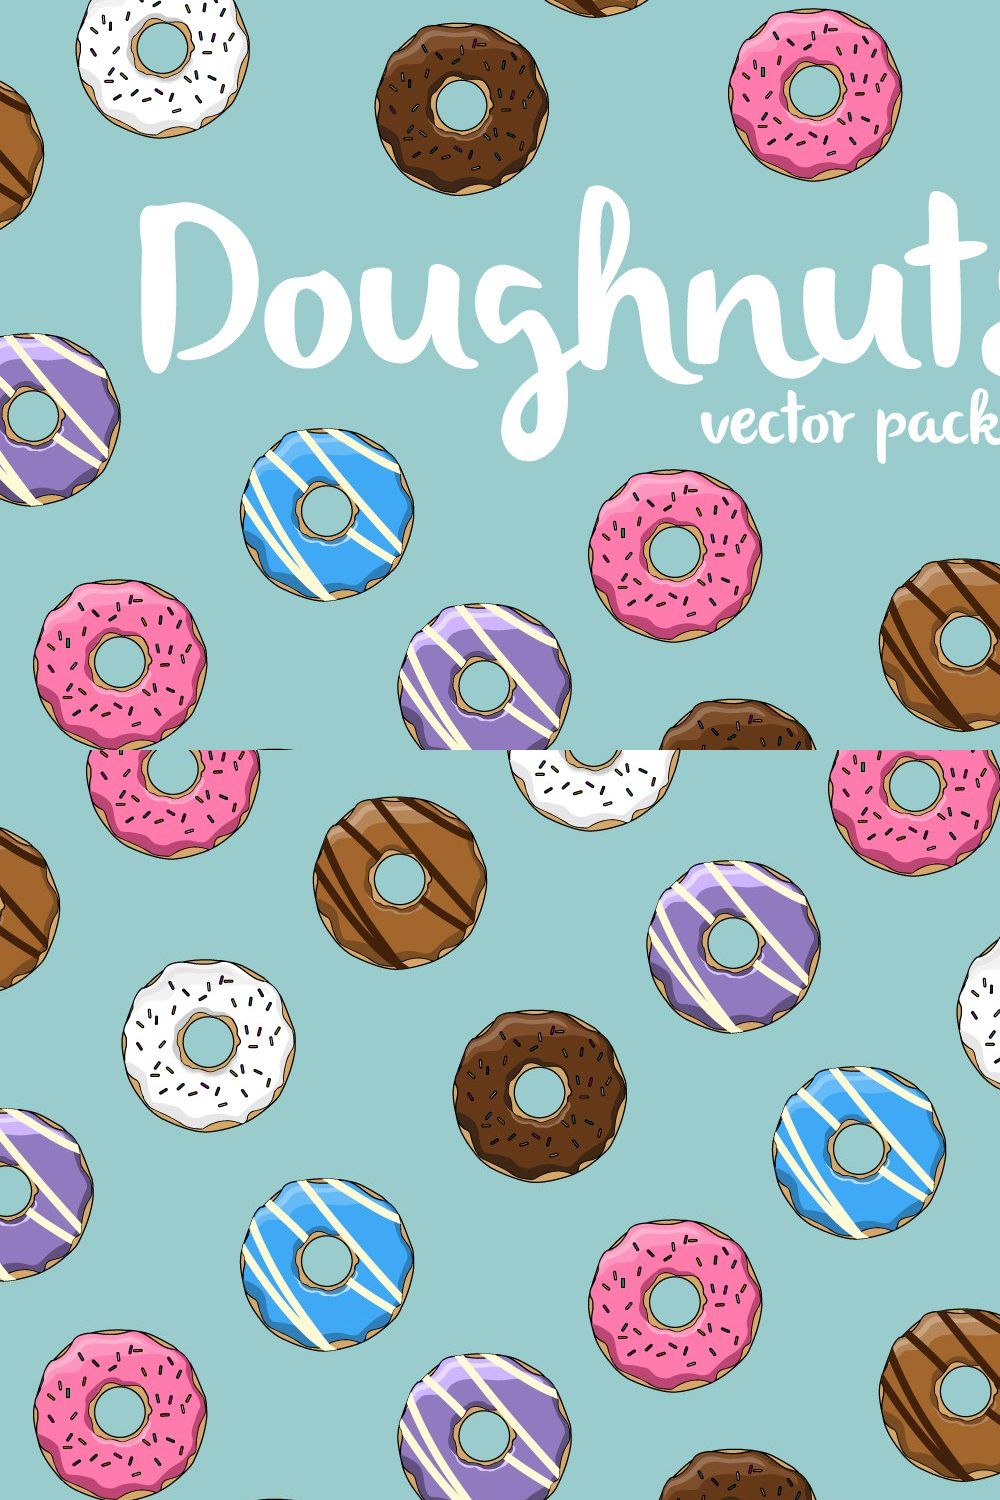 Doughnuts vector pack pinterest preview image.